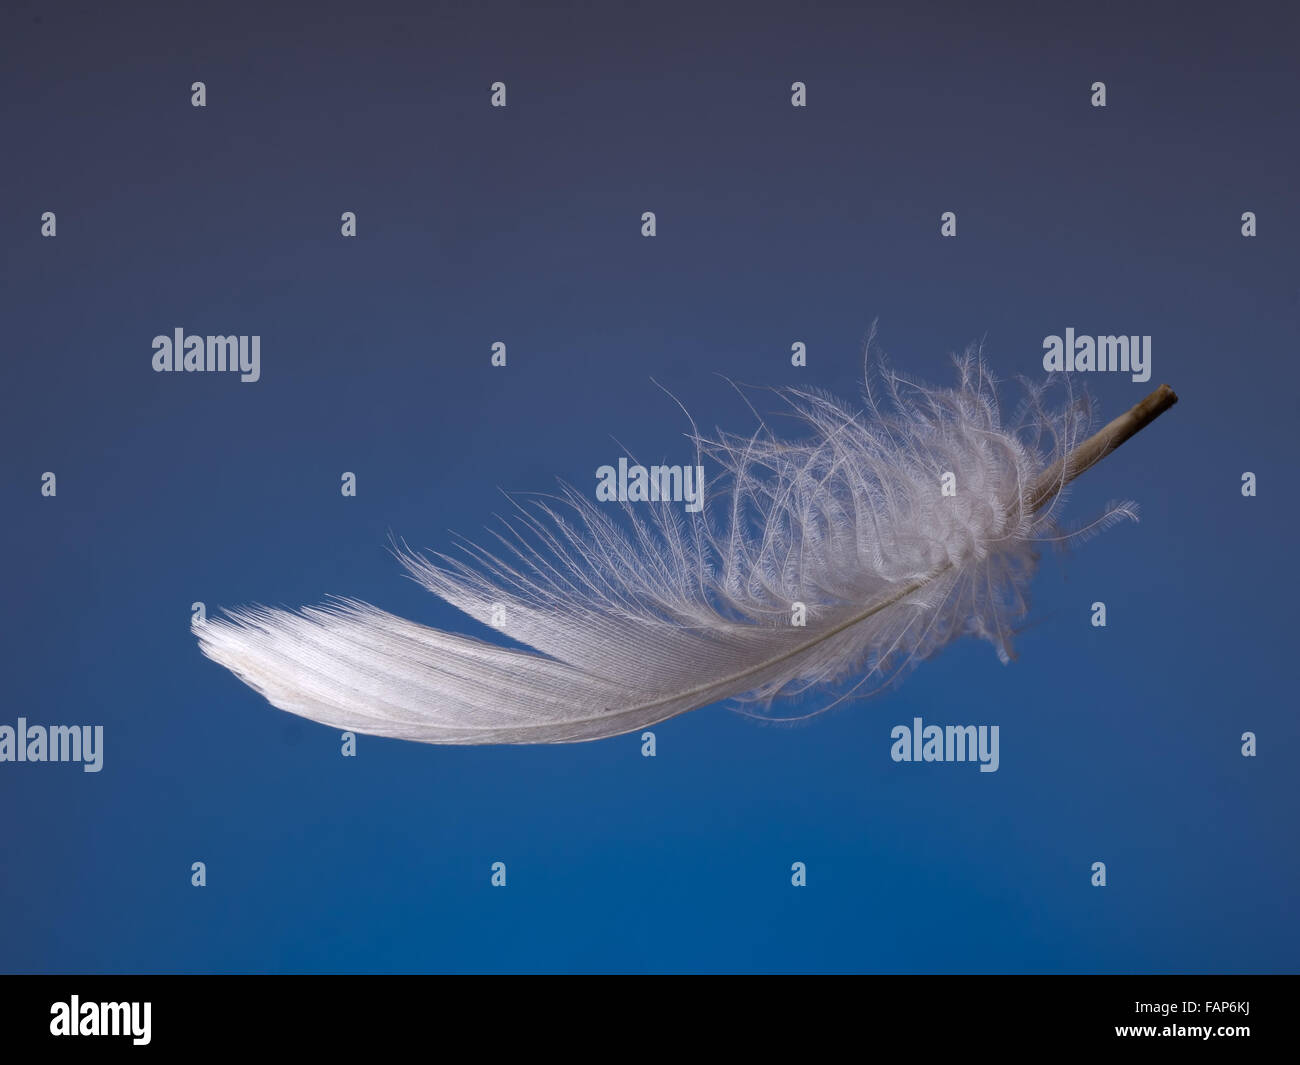 Soft and fluffy feather catches the light. Stock Photo